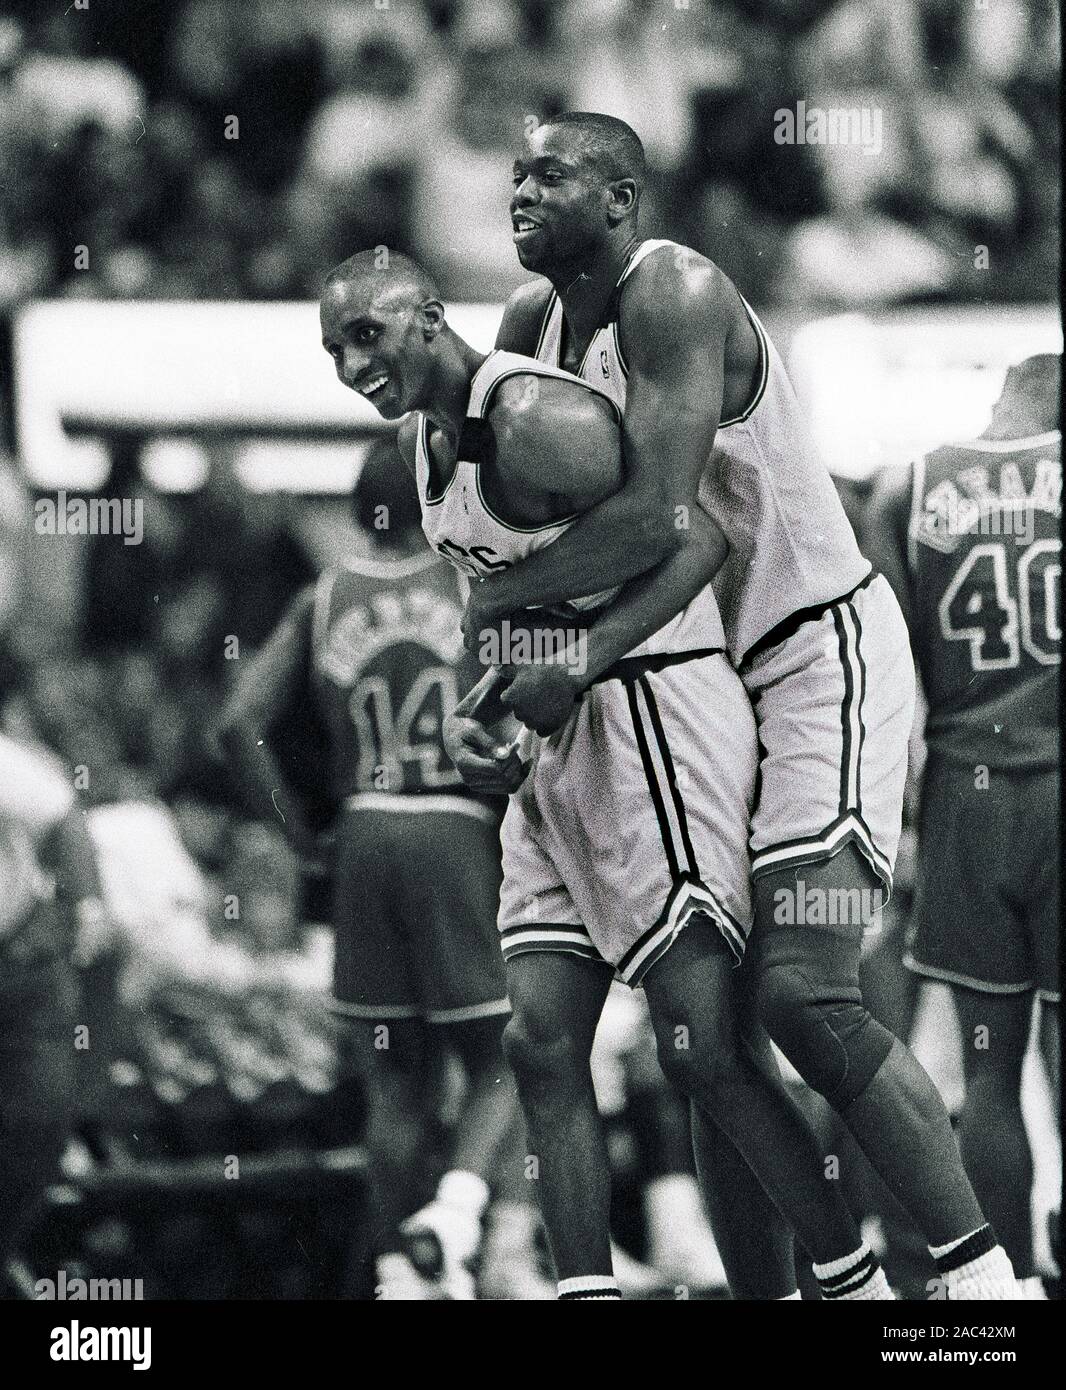 Boston Celtics Ed Pinckney (right) hugs teamate Dee Brown during basketball game action against the Washington Bullets at the Fleet center in Boston Ma USA April 1 1994 photo by bill belknap Stock Photo